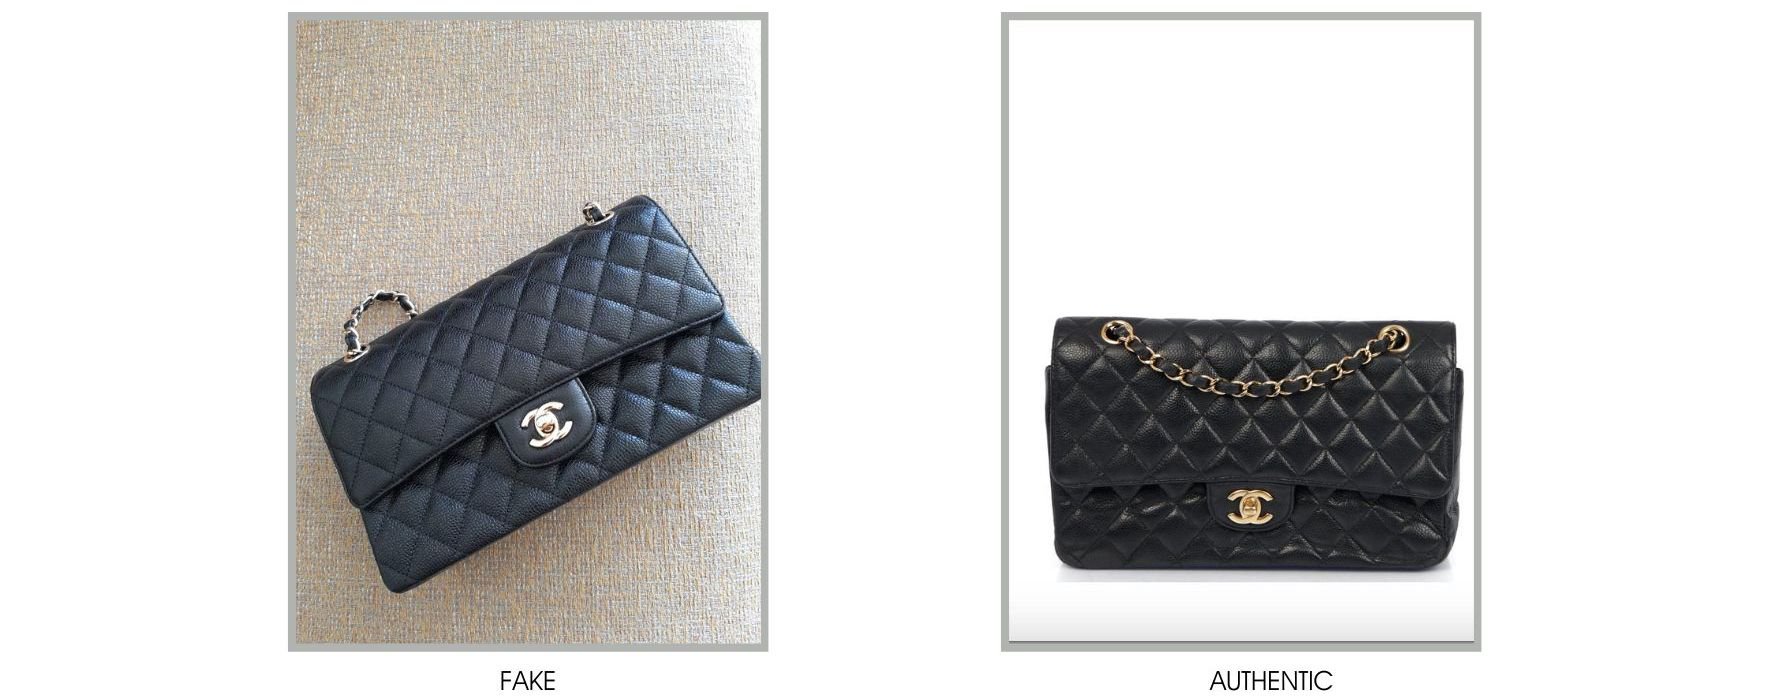 How Much Chanel Bags Have Increased In Price Over the Last 50 Years